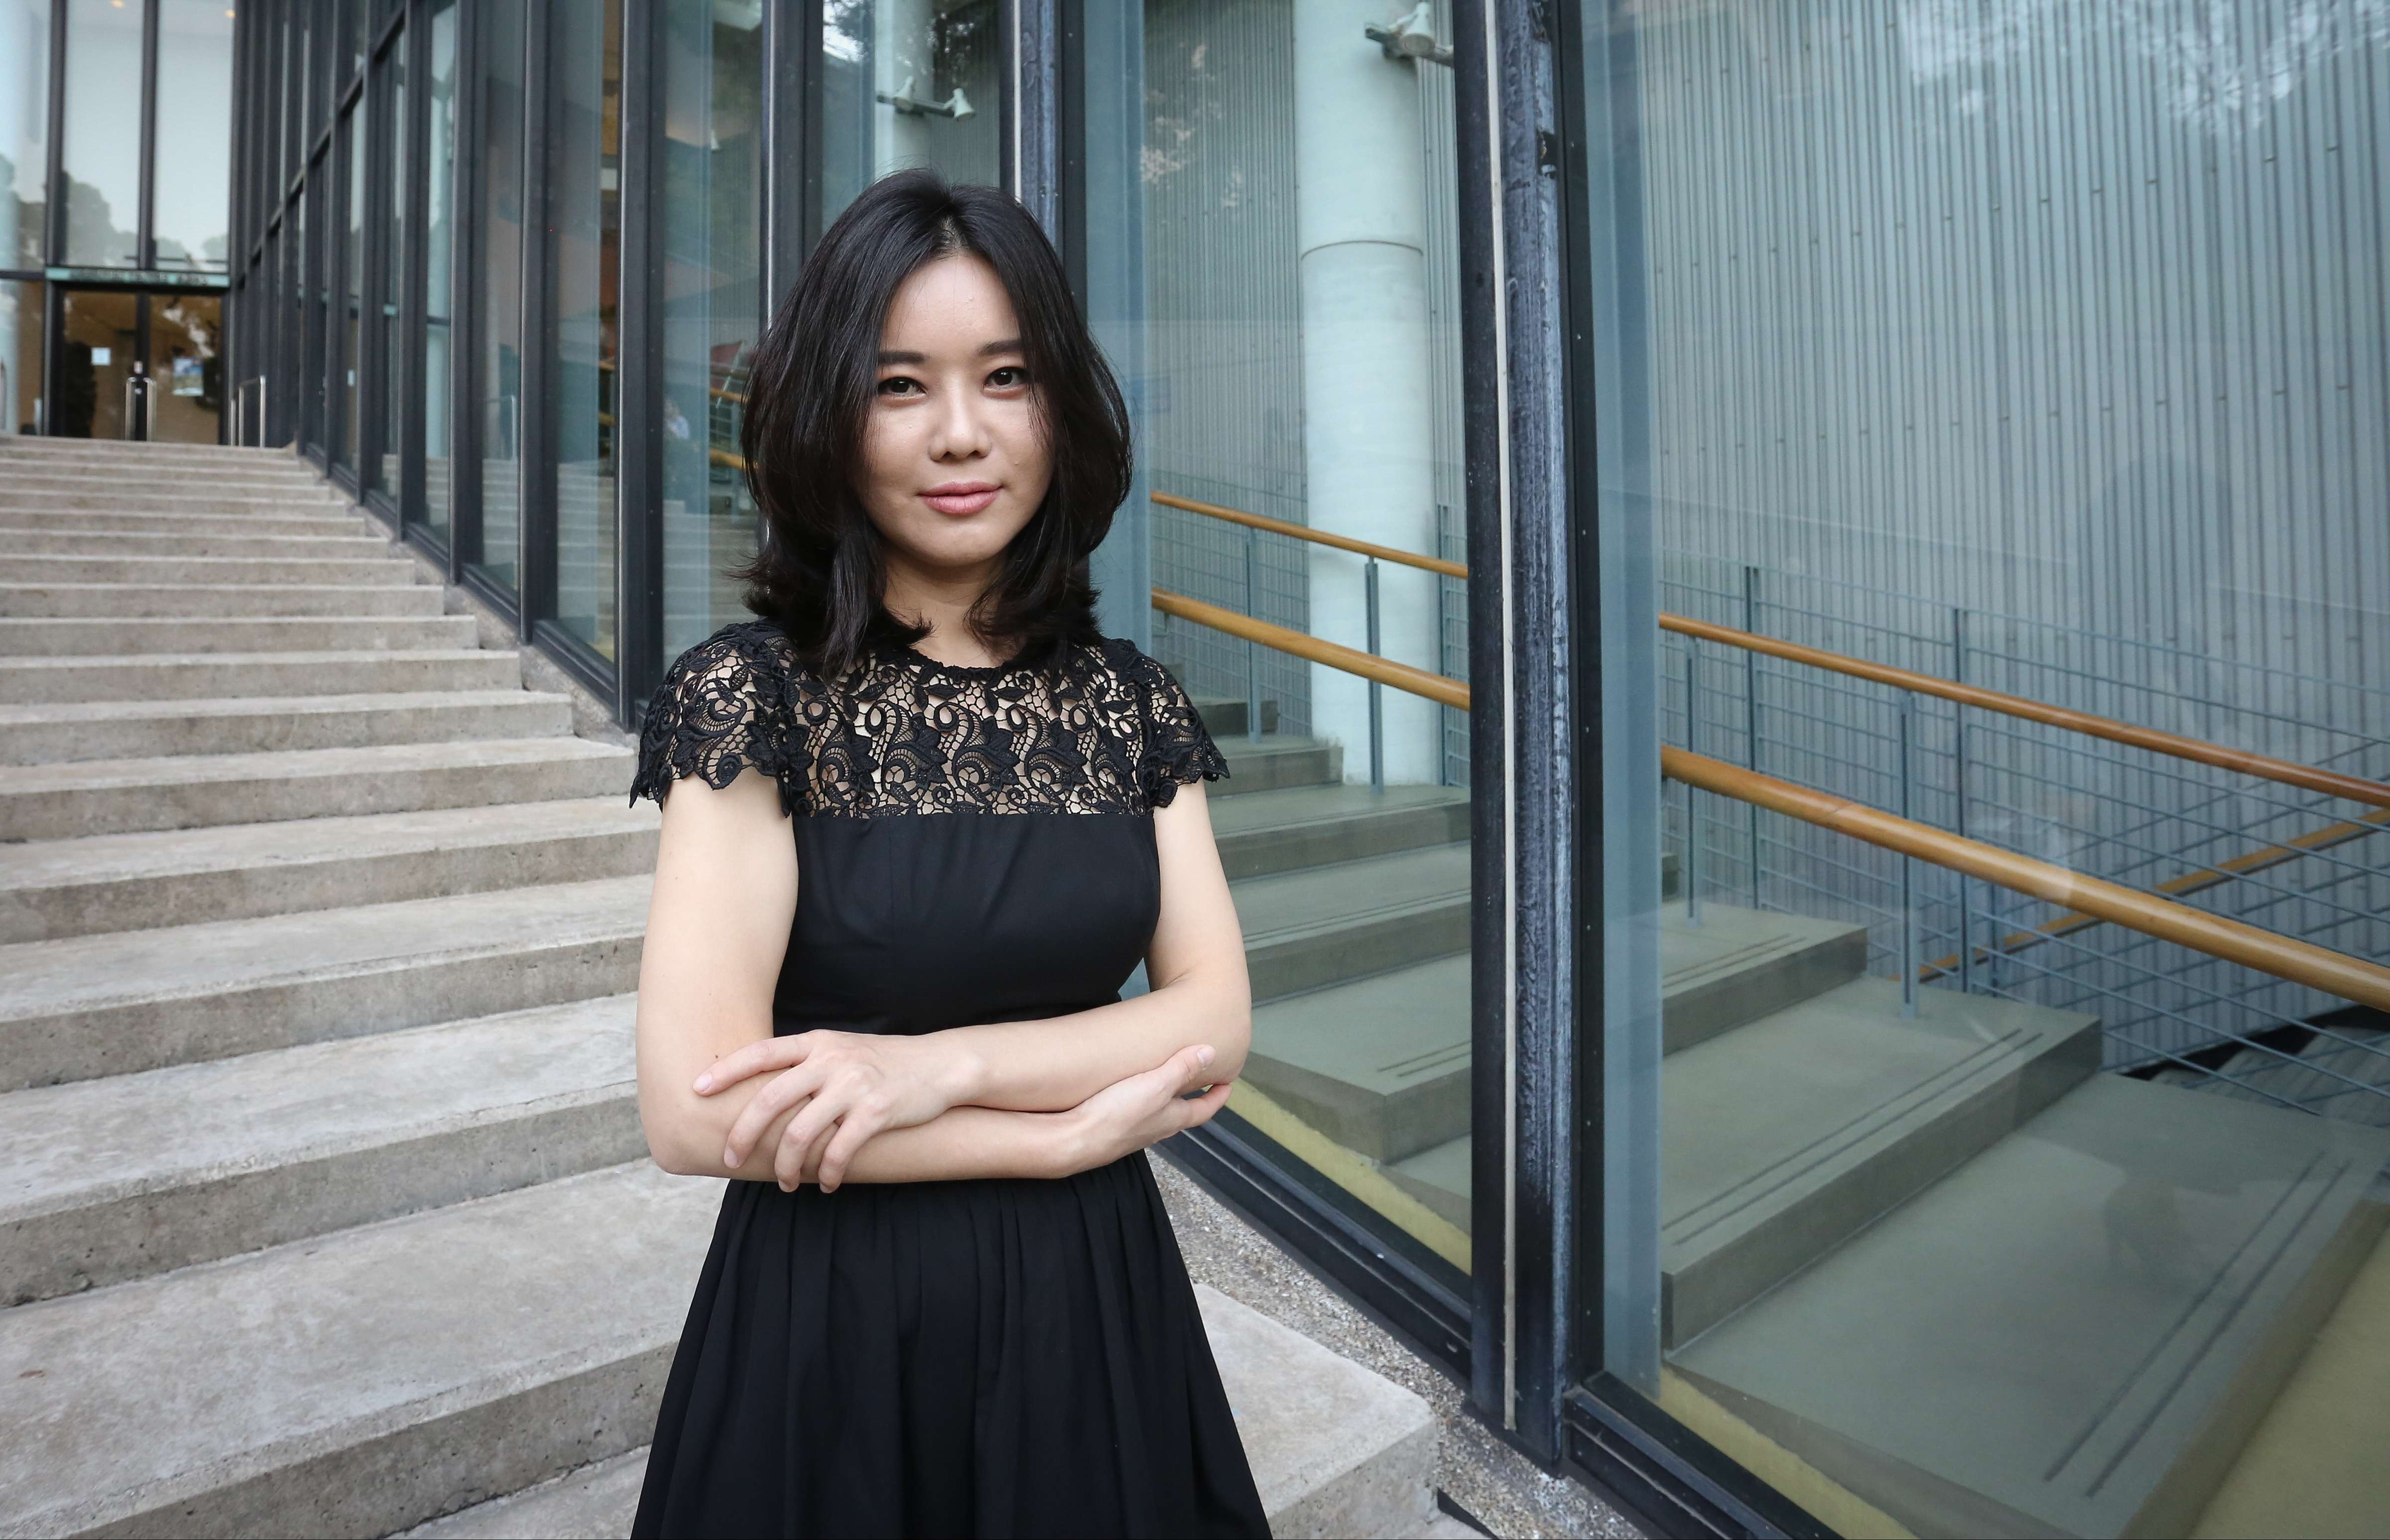 Hyeonseo Lee said she was ‘very sad and disappointed about the situation’ in South Korea. Photo: Jonathan Wong